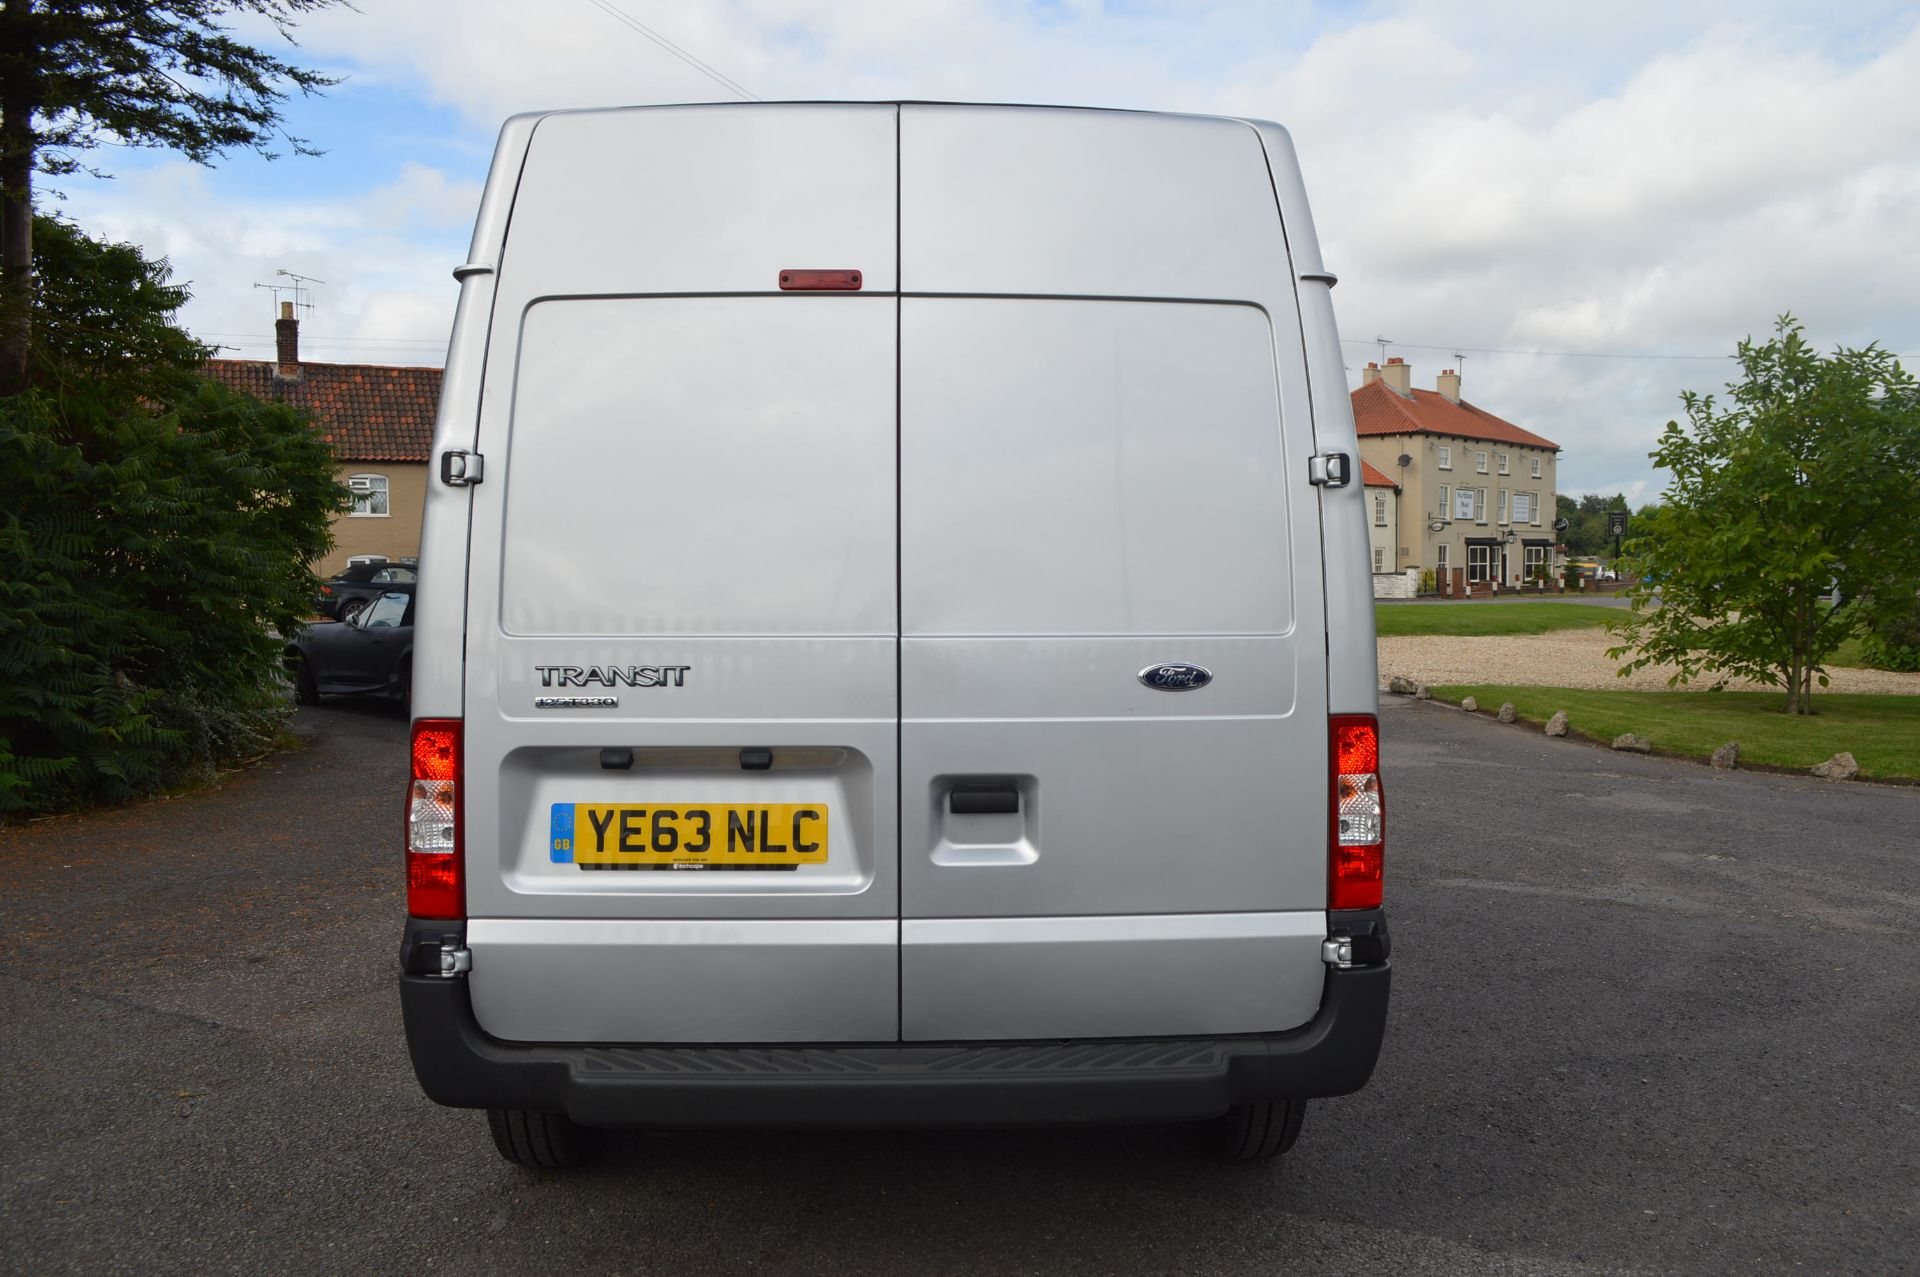 2013/63 REG FORD TRANSIT 125 T330 FWD - 1 OWNER FROM NEW, AIR CON, HEATED WINDSCREEN! *NO VAT* - Image 5 of 25